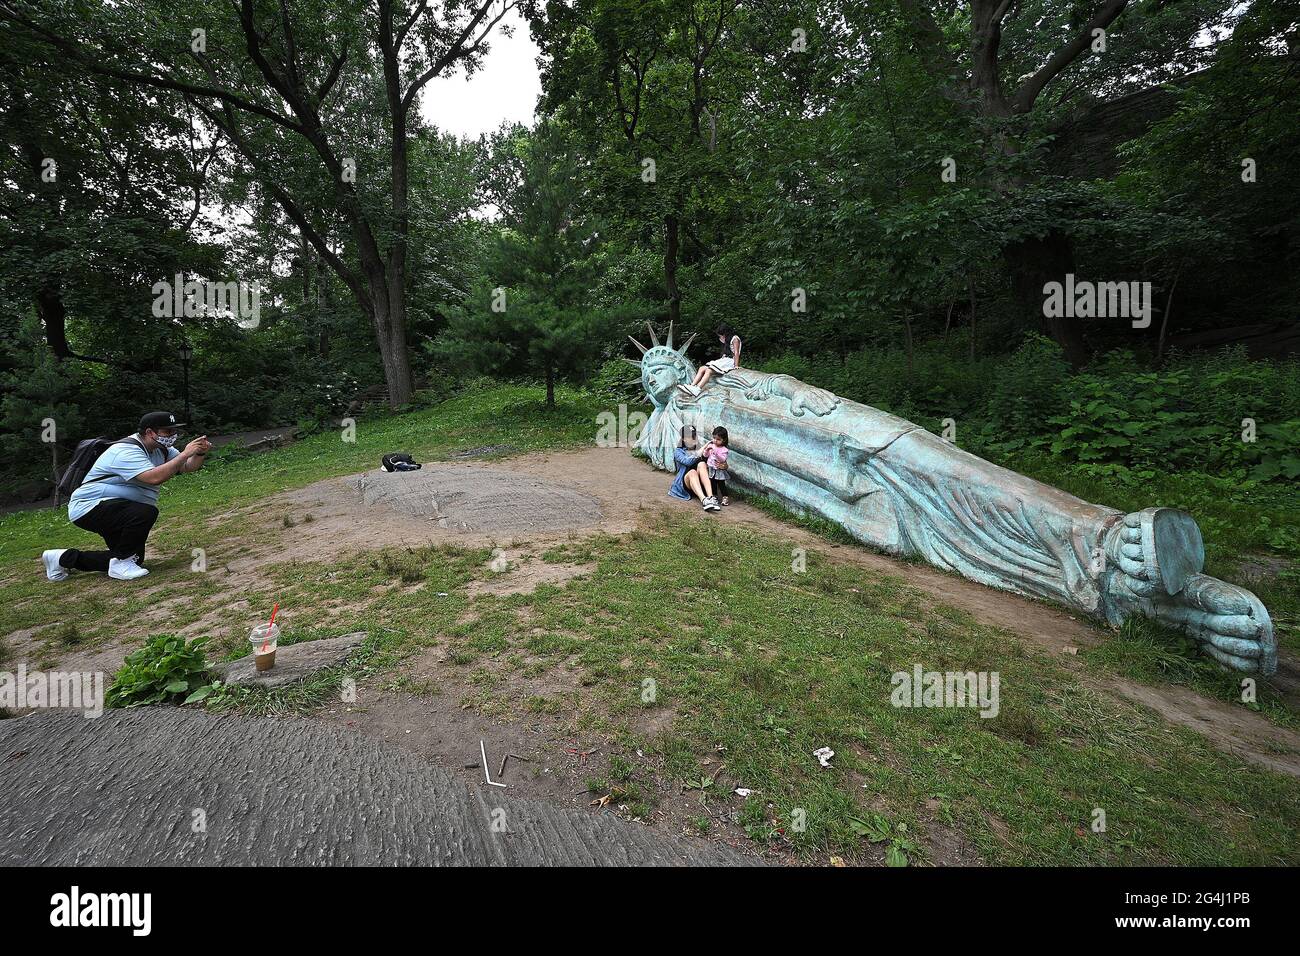 New York, USA. 21st June, 2021. A man takes a picture of his family in posing in front of “Reclining Liberty”, a 25 foot long replica of the Statue of Liberty sculptured by artist Zaq Landsberg, in Morningside Park, in New York, NY, June 21, 2021. (Photo by Anthony Behar/Sipa USA) Credit: Sipa USA/Alamy Live News Stock Photo